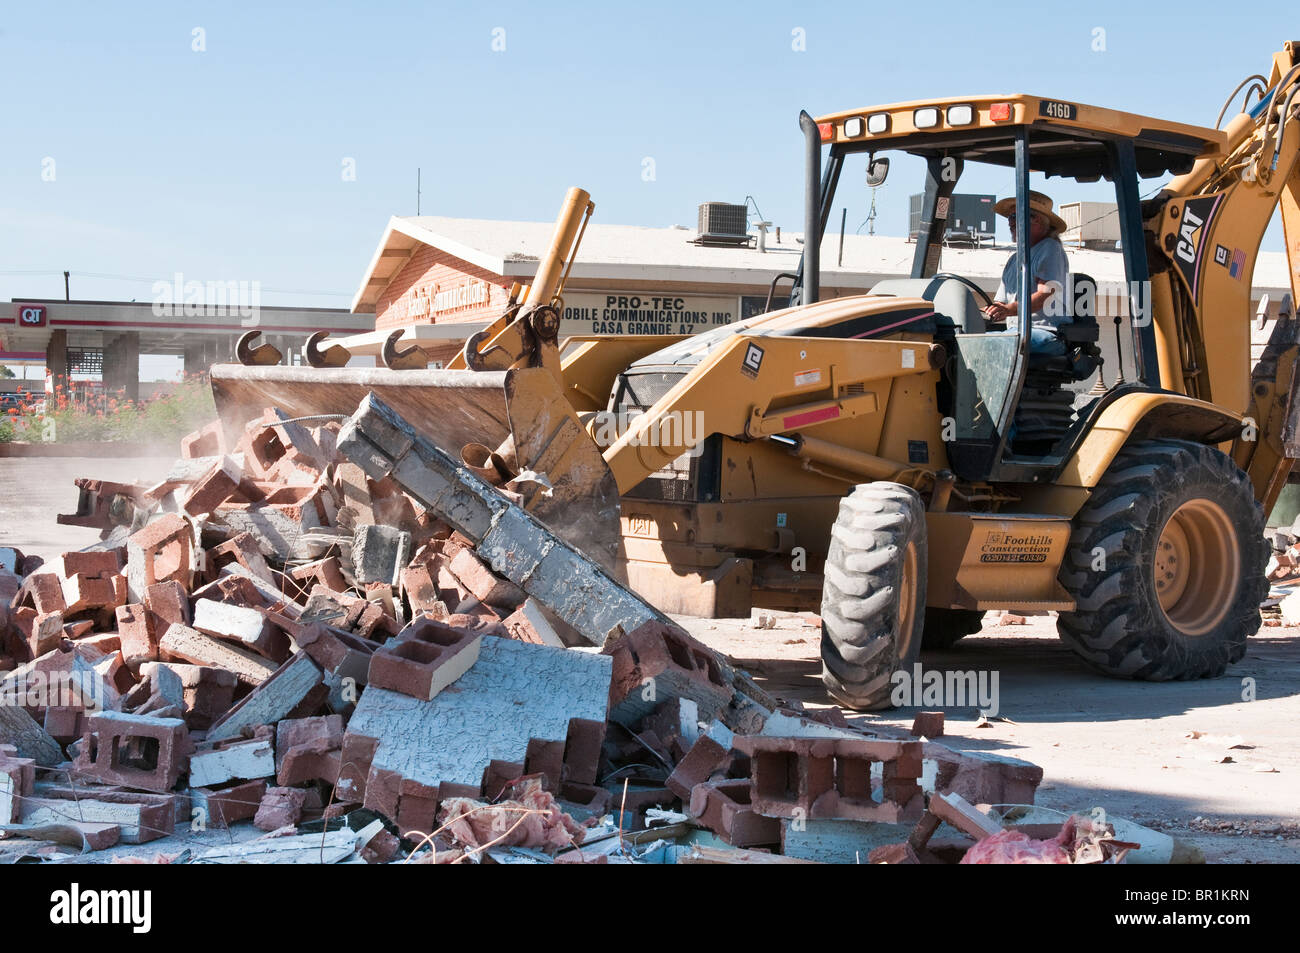 Material from an old commercial building that has been torn down is being cleared from the work site. Stock Photo